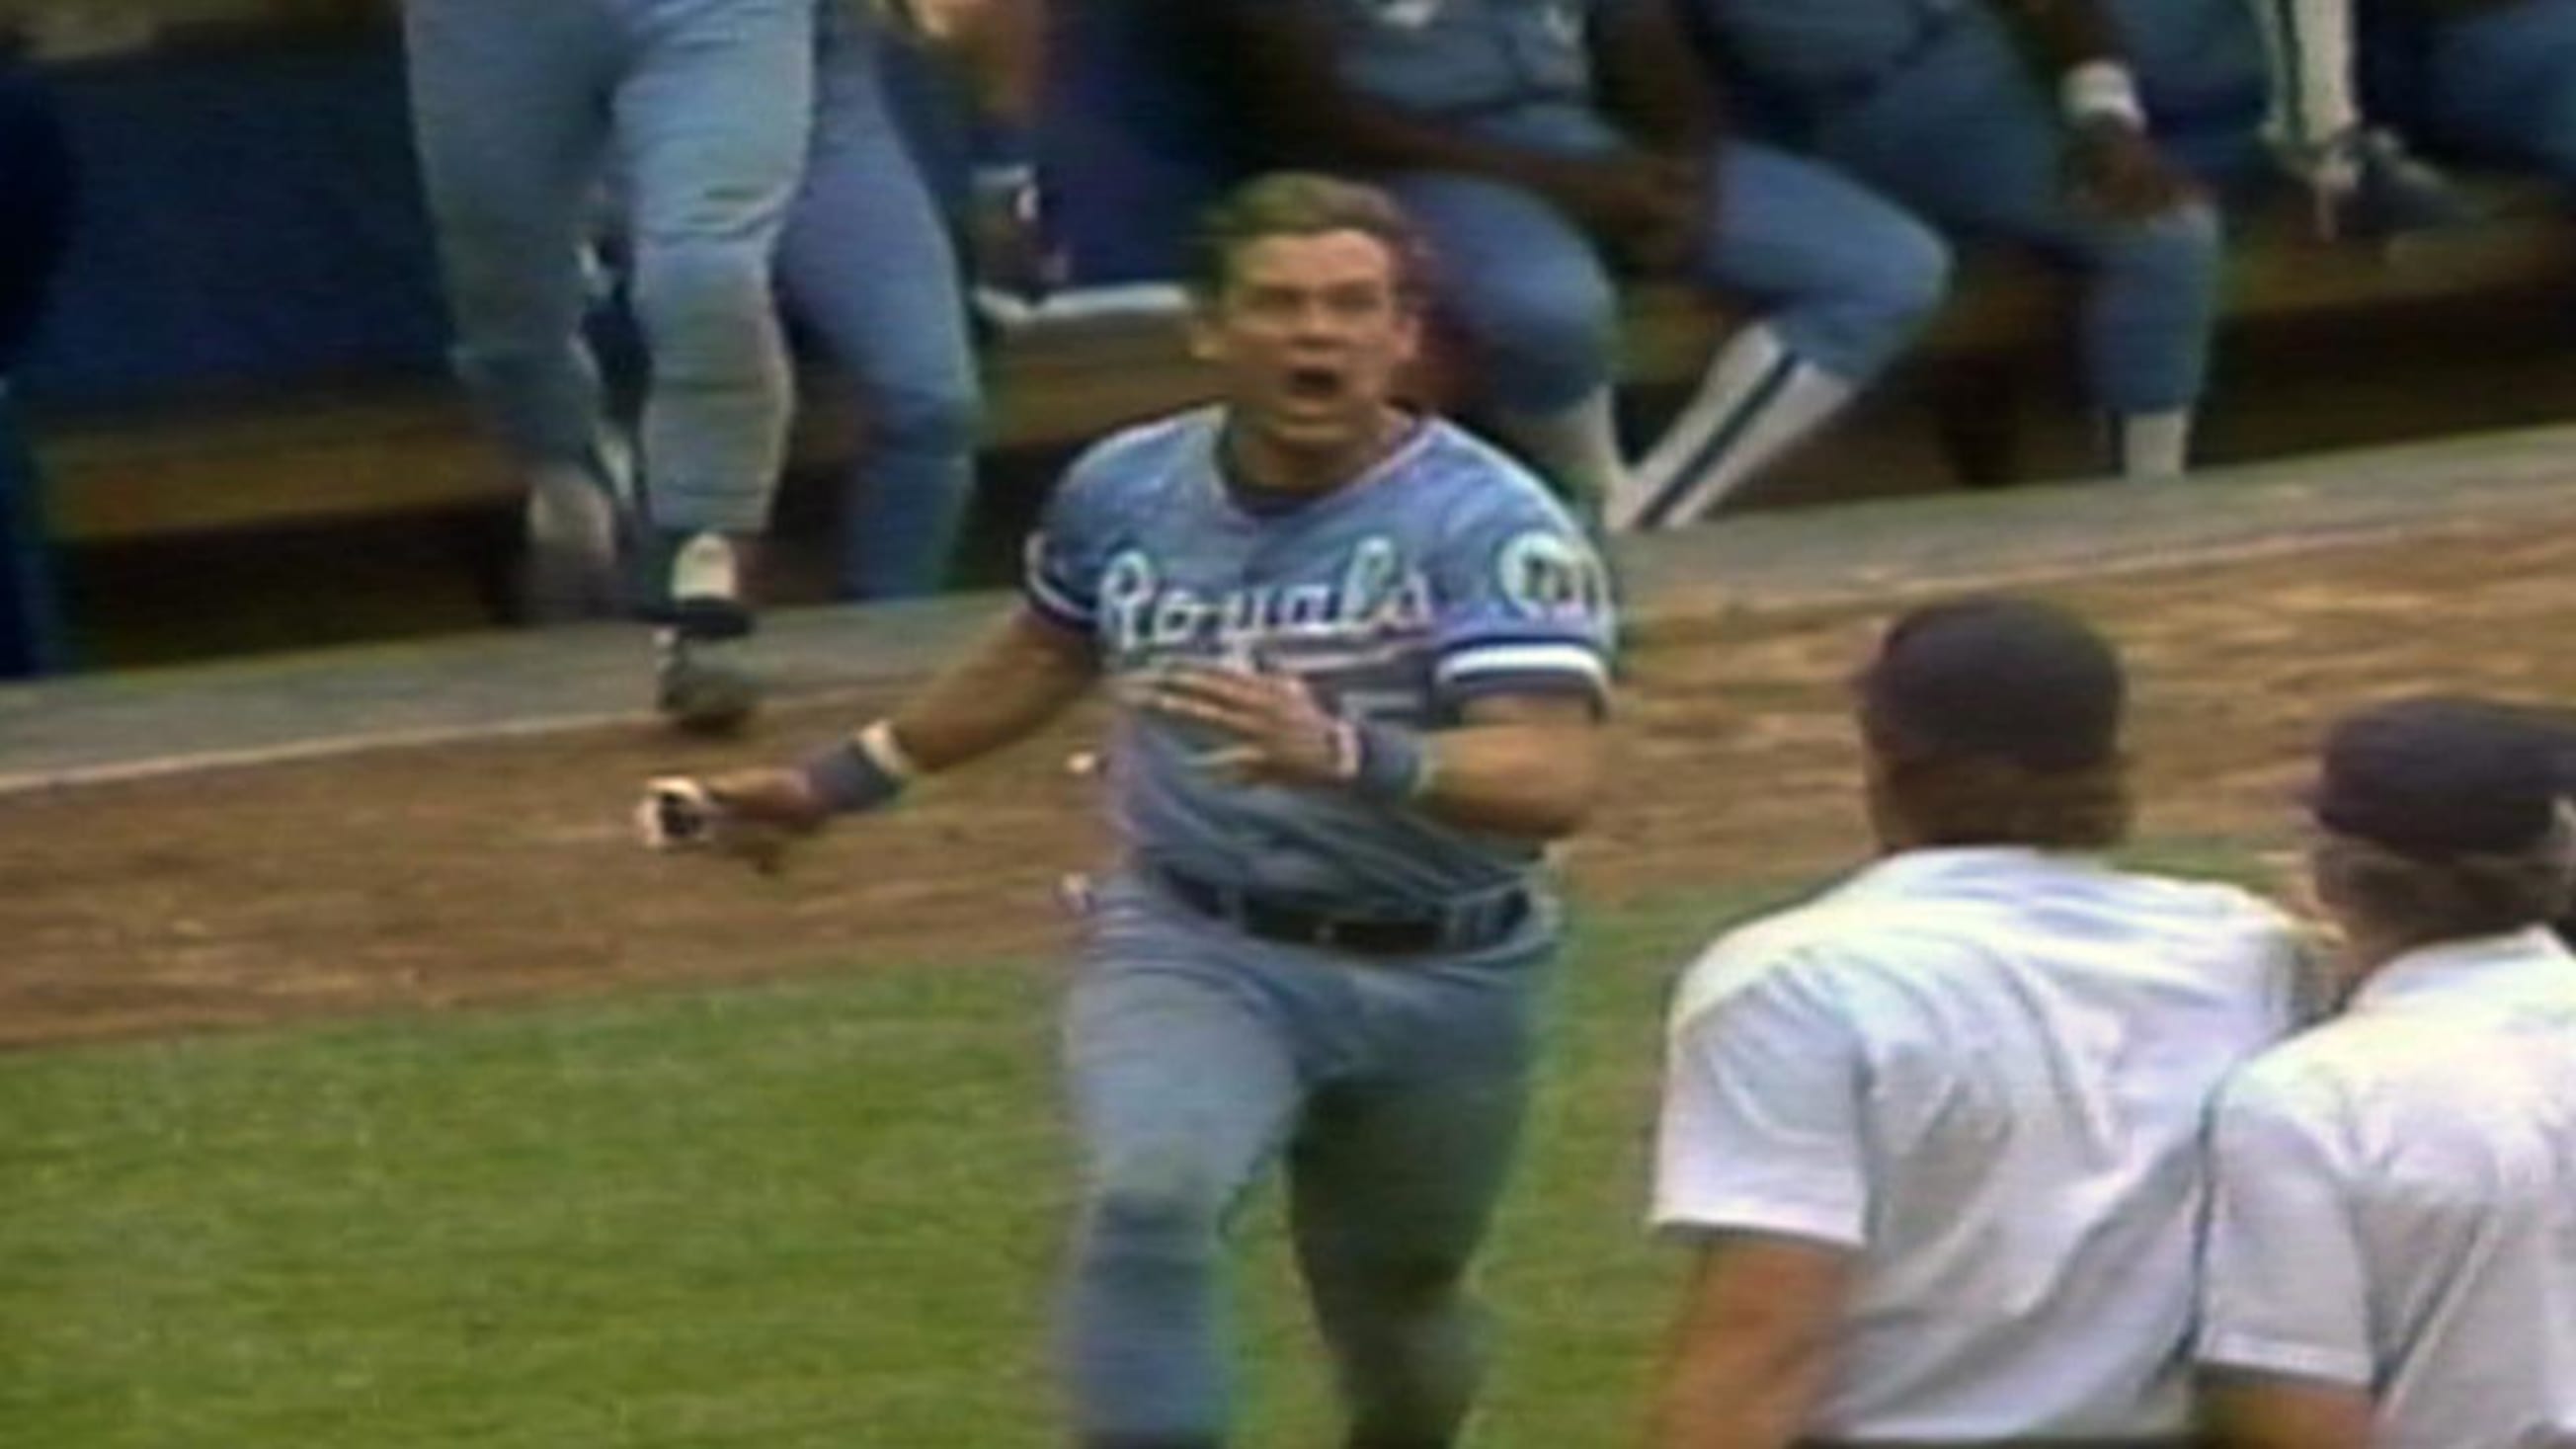 10. (SOLD OUT) The Pine Tar Incident George Brett 7 x 10.5 Art Print